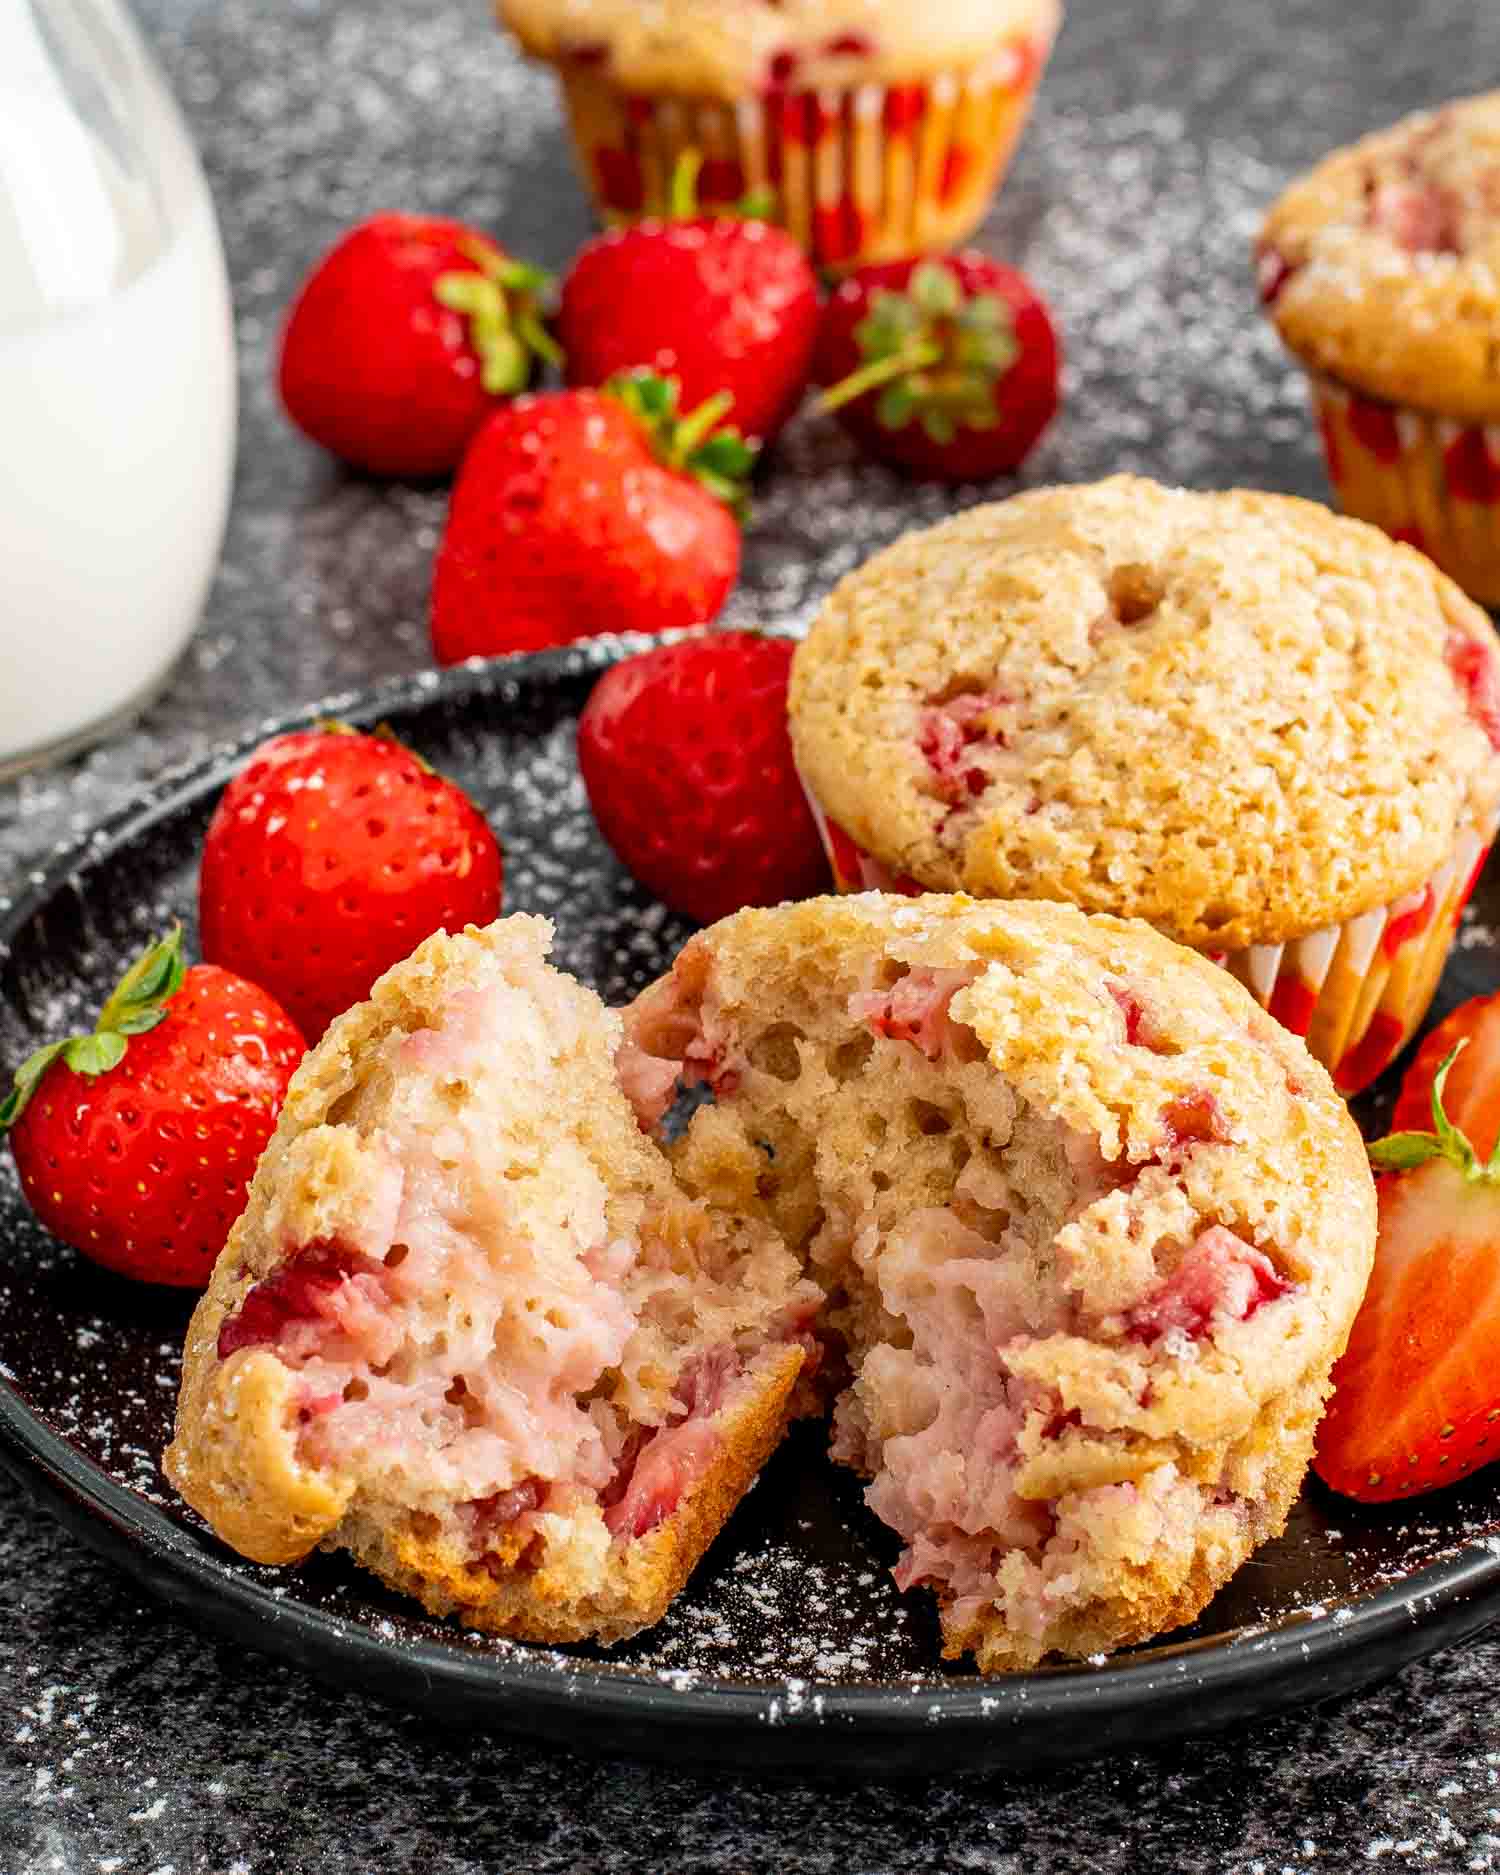 two strawberry muffins on a black plate along side some fresh strawberries.